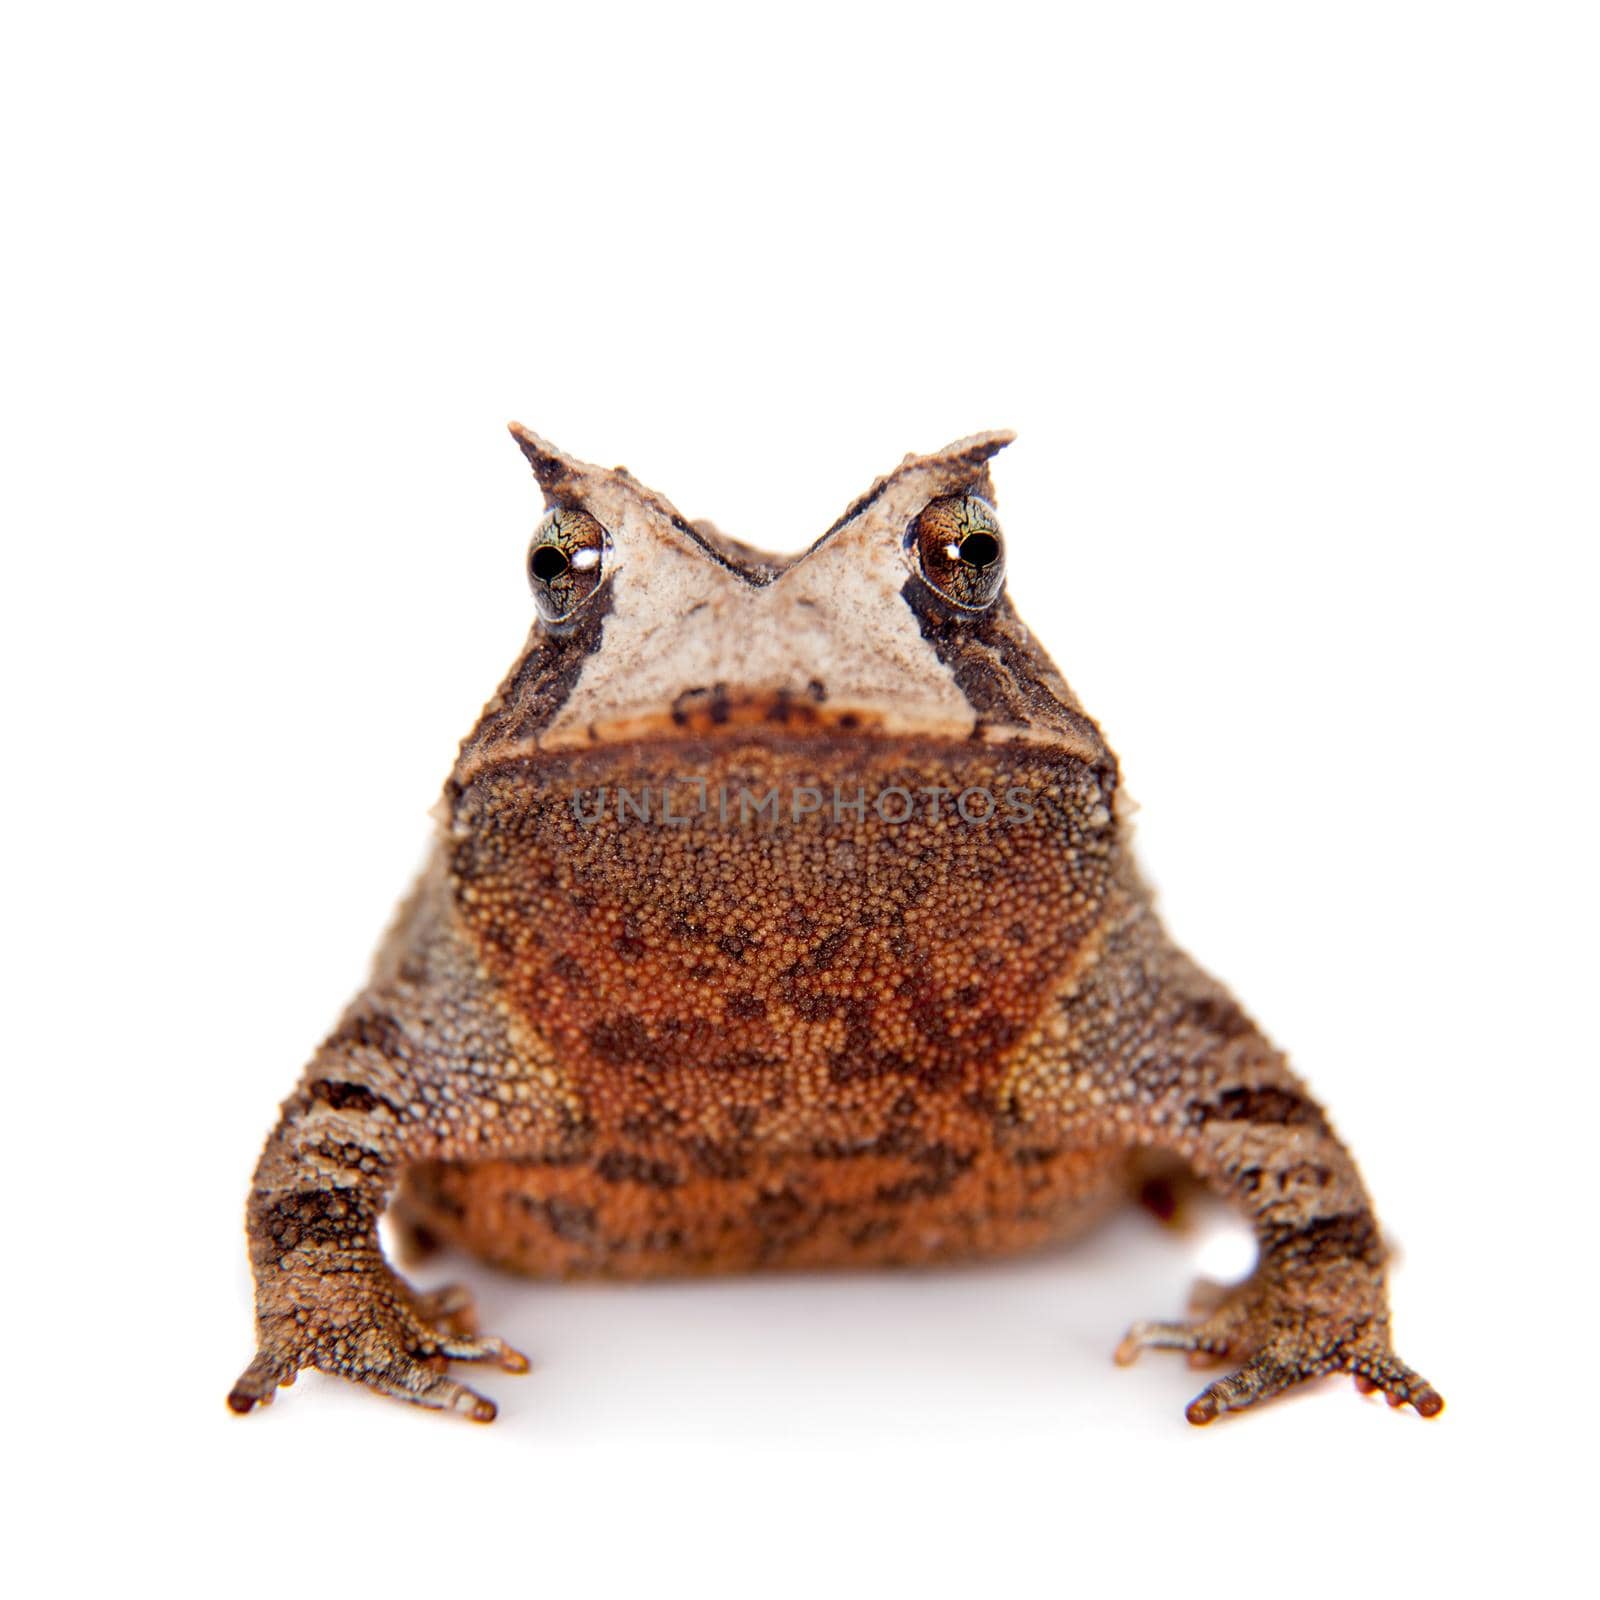 Cerrado toad, Proceratophrys boiei, isolated on white background